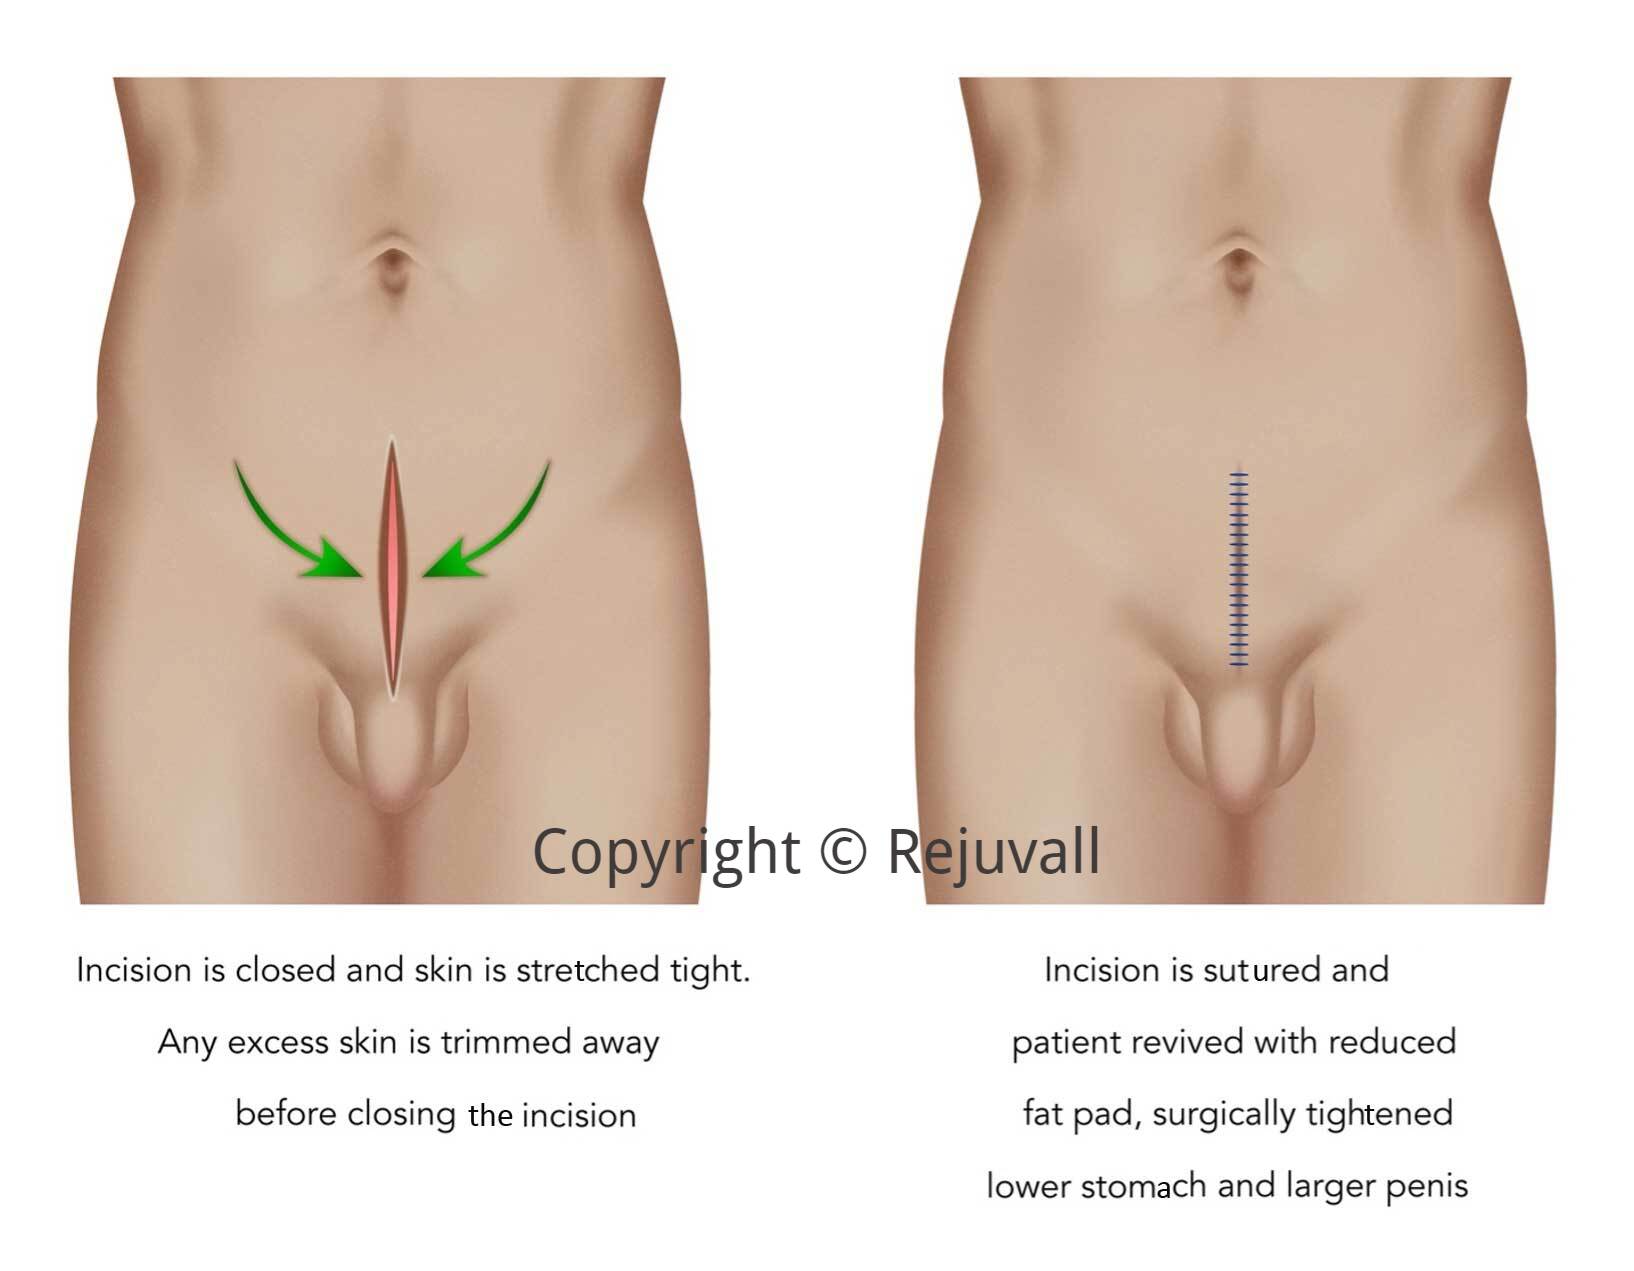 penile lengthening fat pad removed